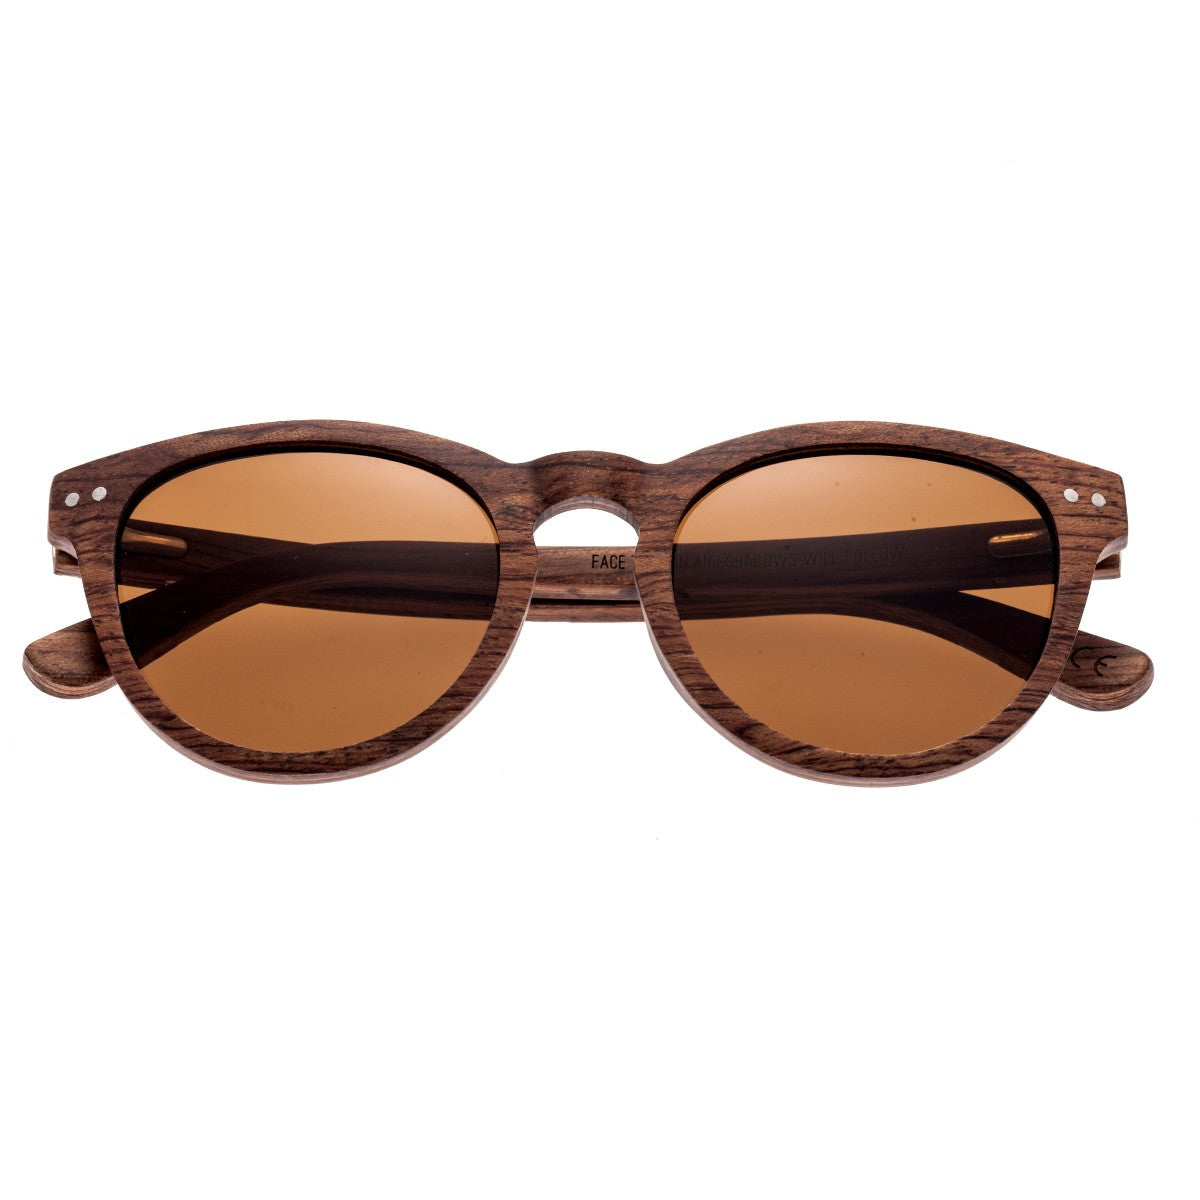 Earth Wood Copacabana Polarized Sunglasses - Red Rosewood/Brown - ESG020R